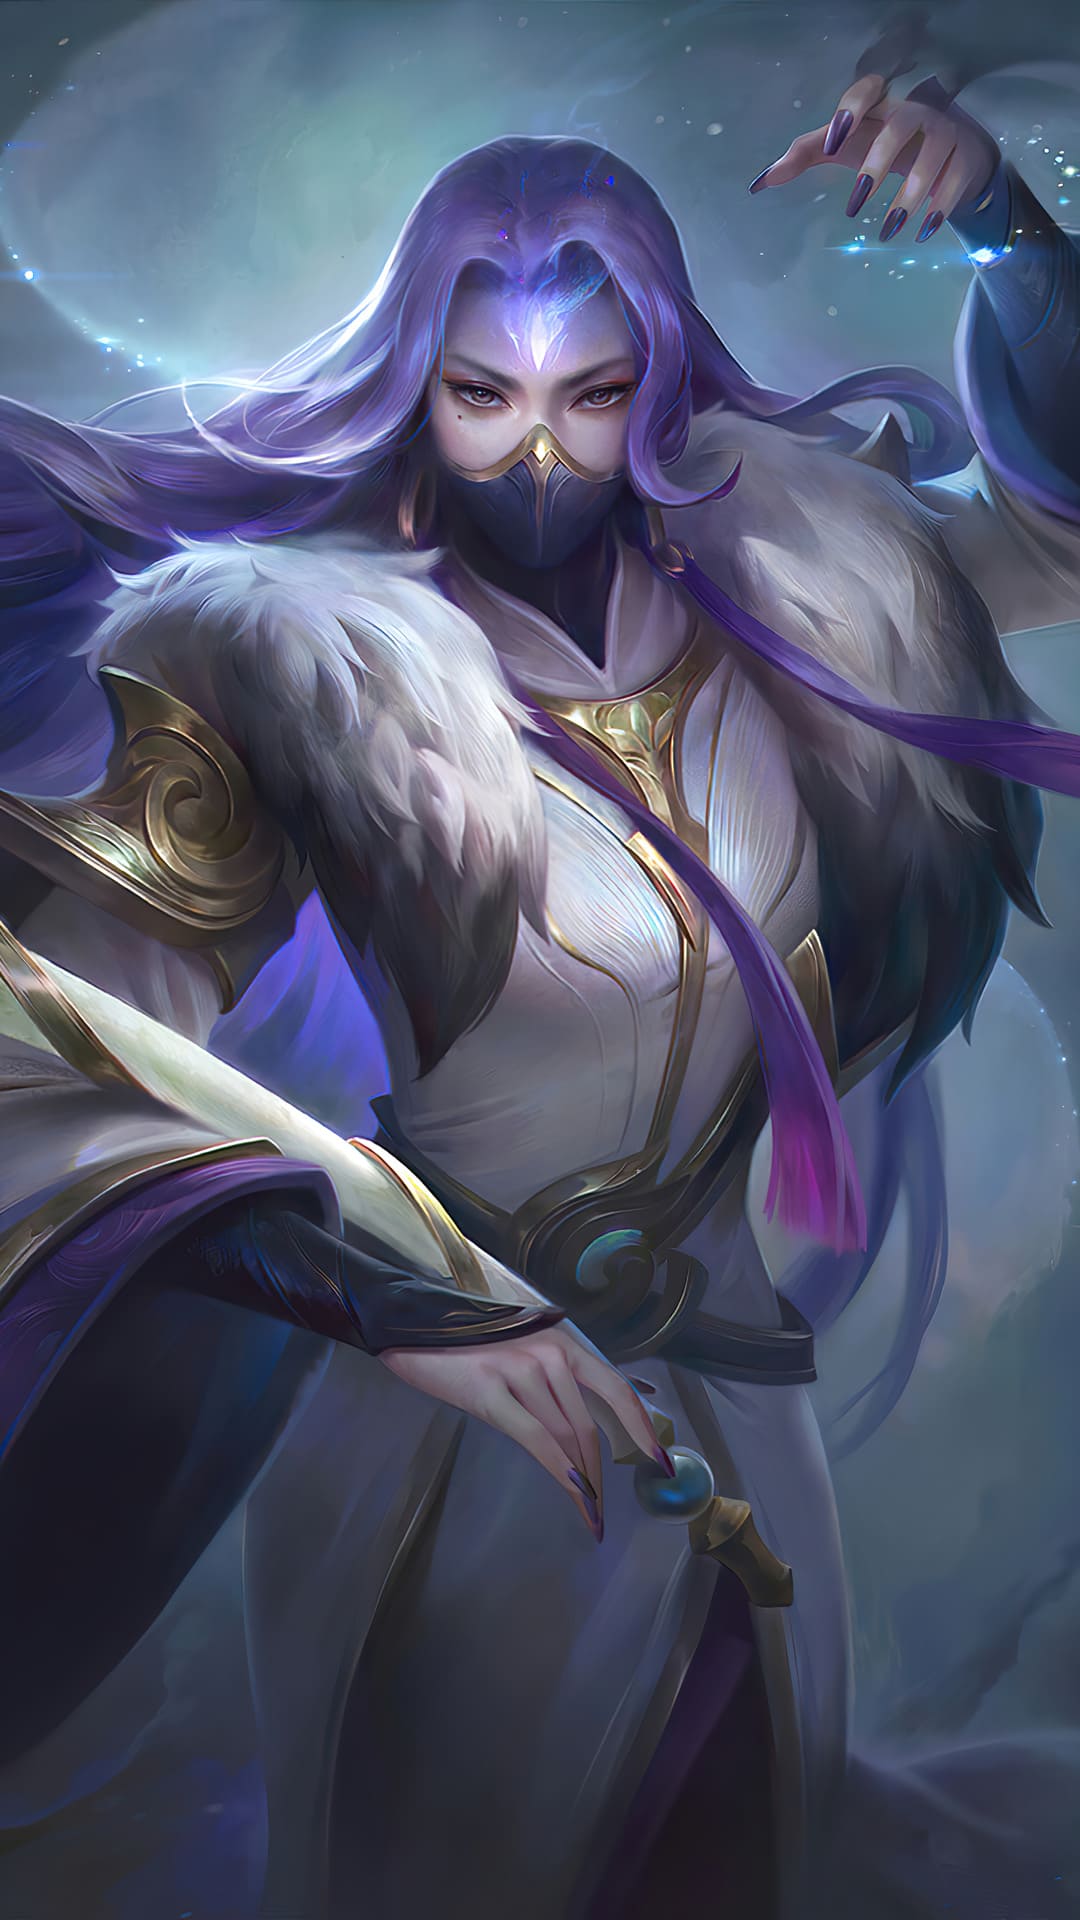 Mobile Legends Wallpaper Android